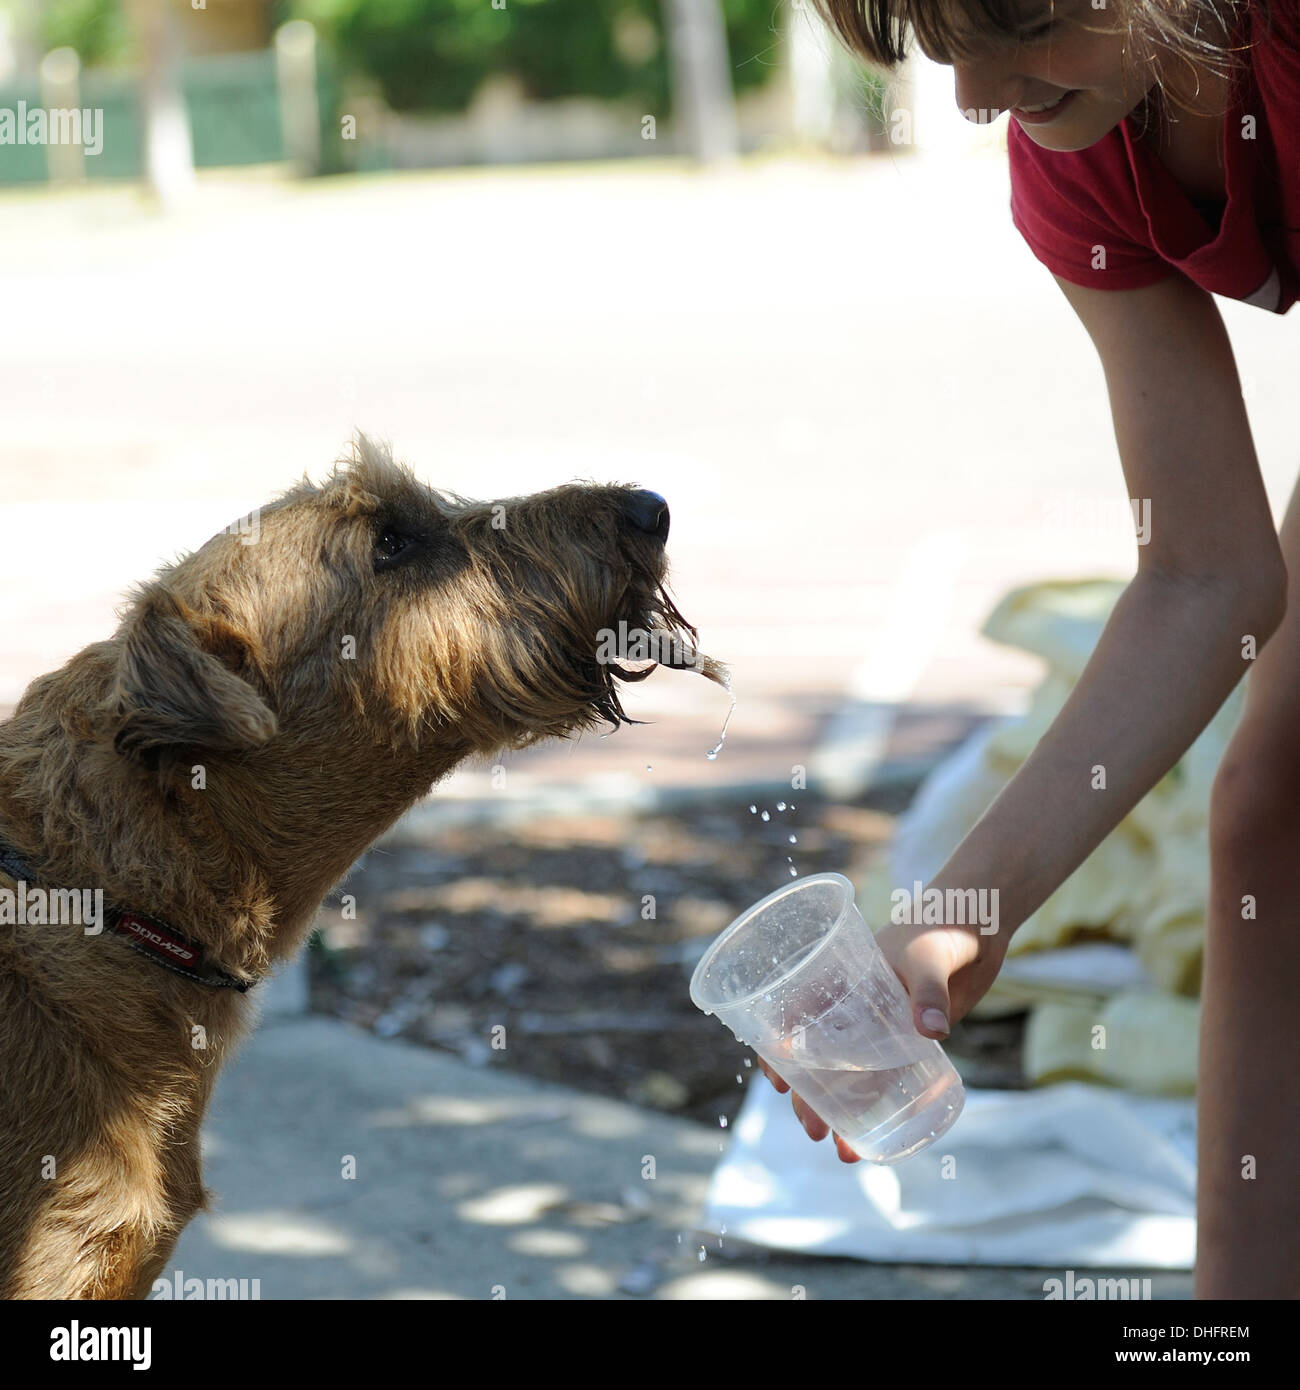 11 year old girl giving a dog a drink of water from a plastic cup on a very hot day Stock Photo